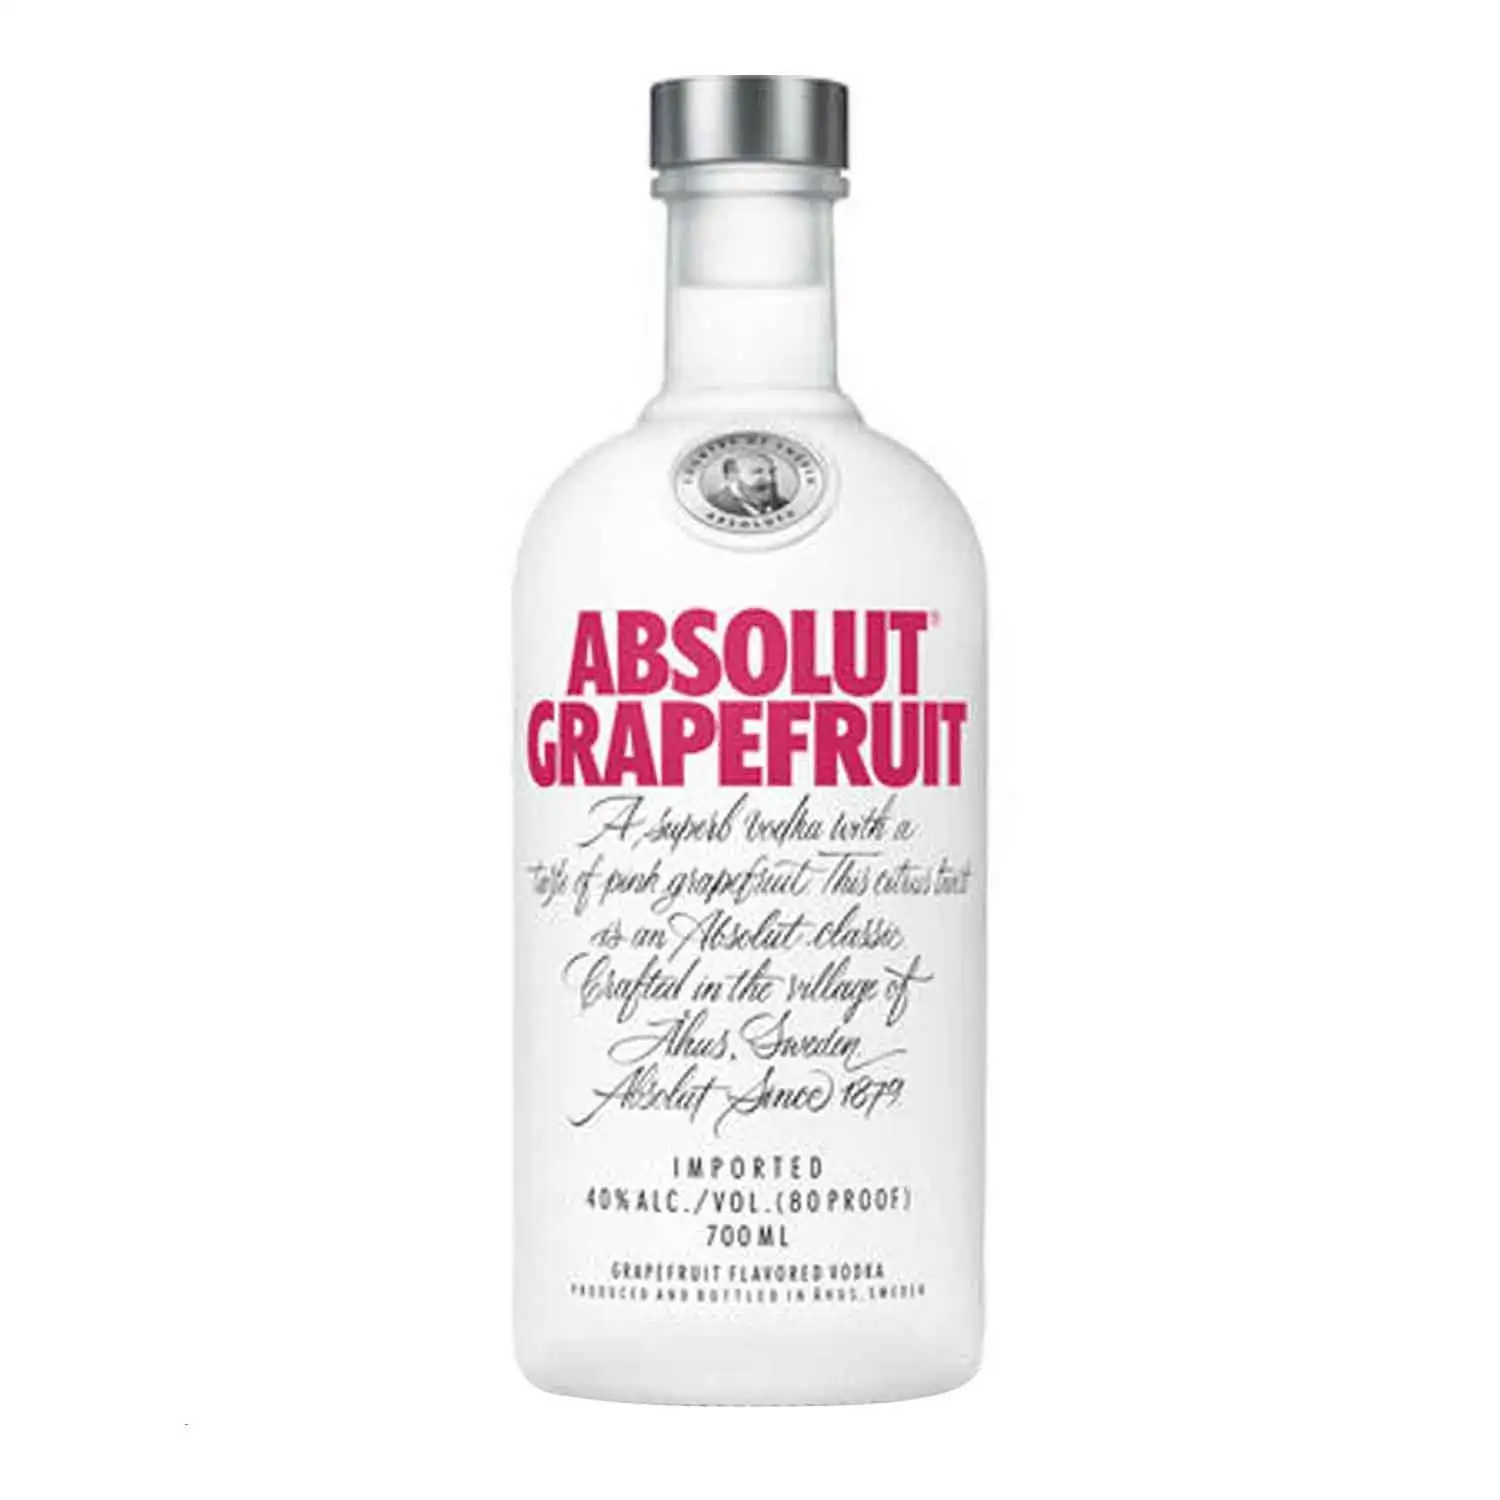 Absolut pamplemousse 70cl Alc 40% - Buy at Real Tobacco